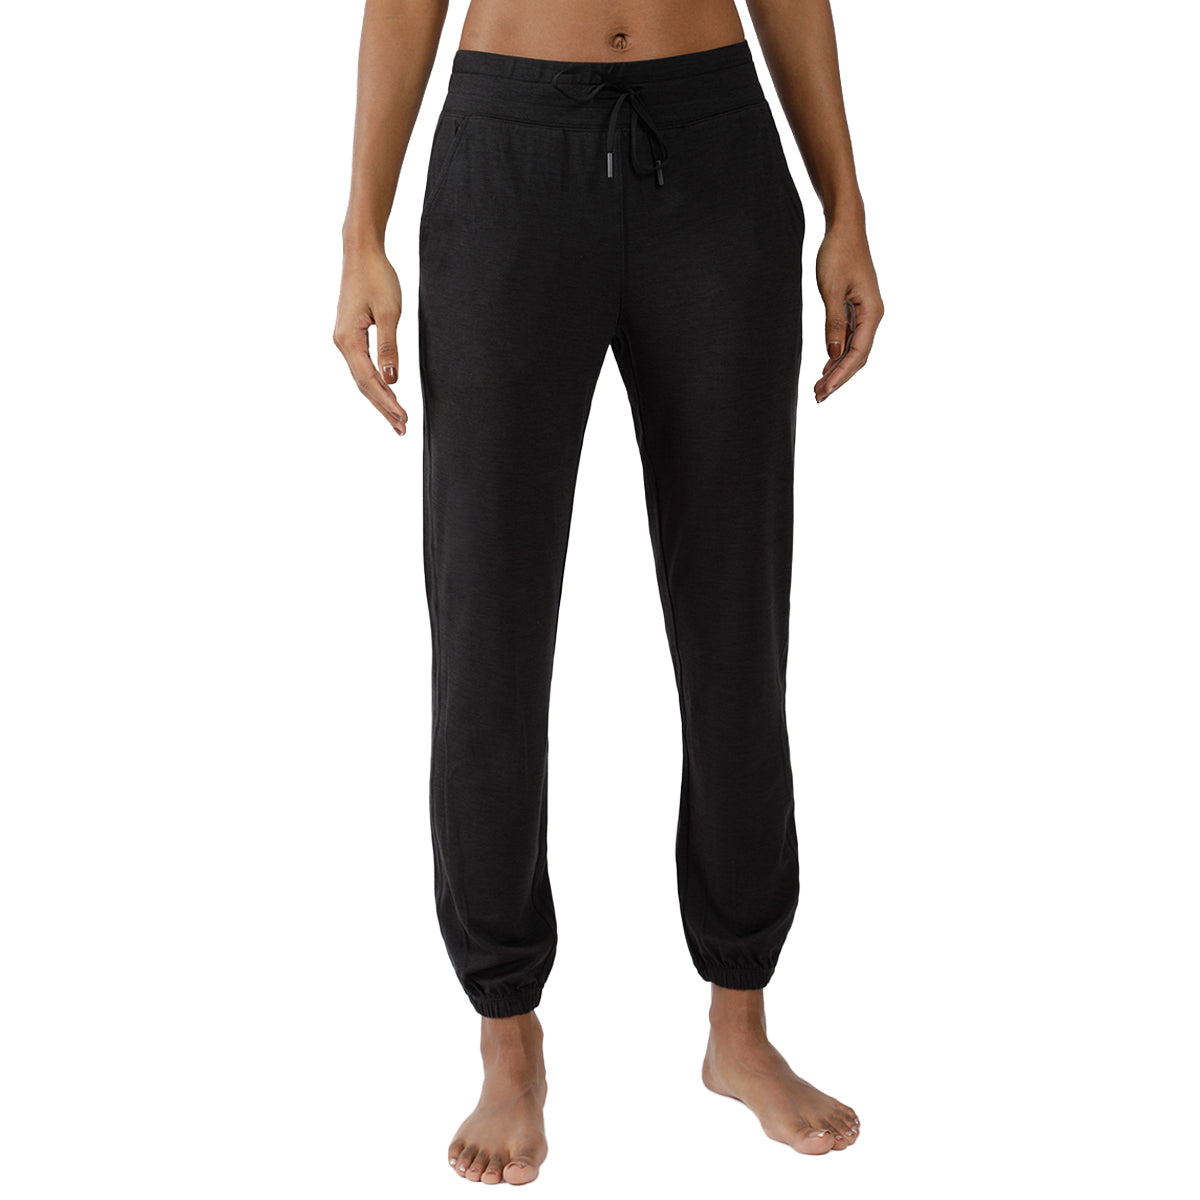 90 Degree By Reflex Joggers Casual Pants for Women